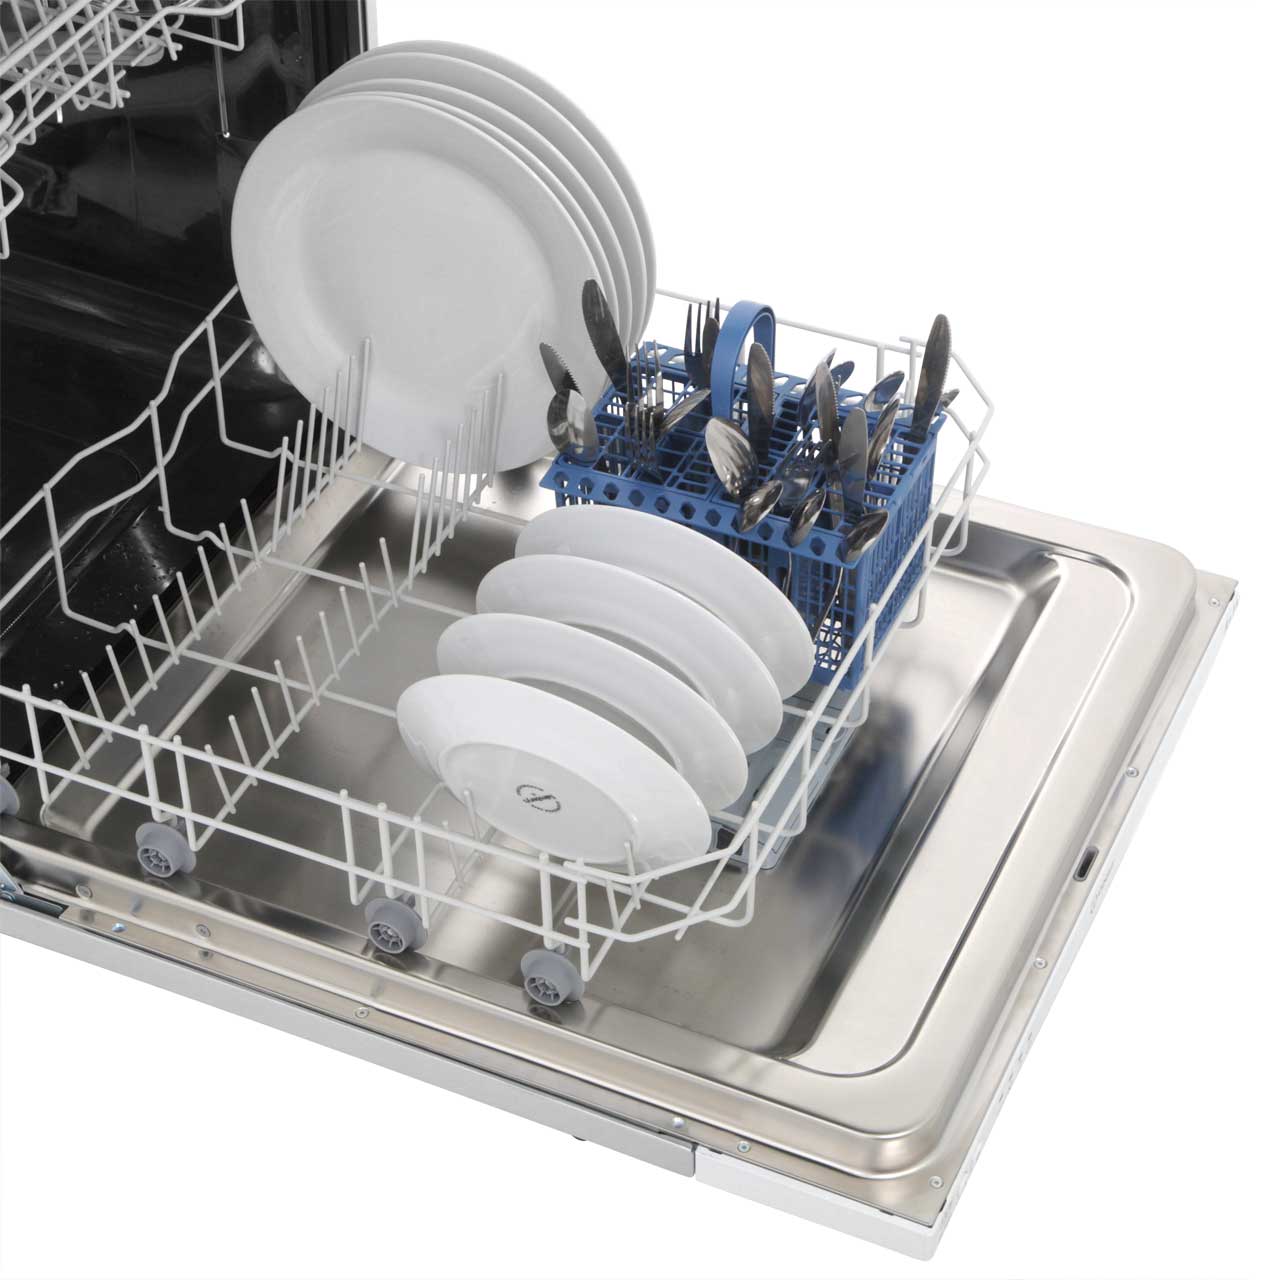 indesit eco time dif04b1 fully integrated standard dishwasher